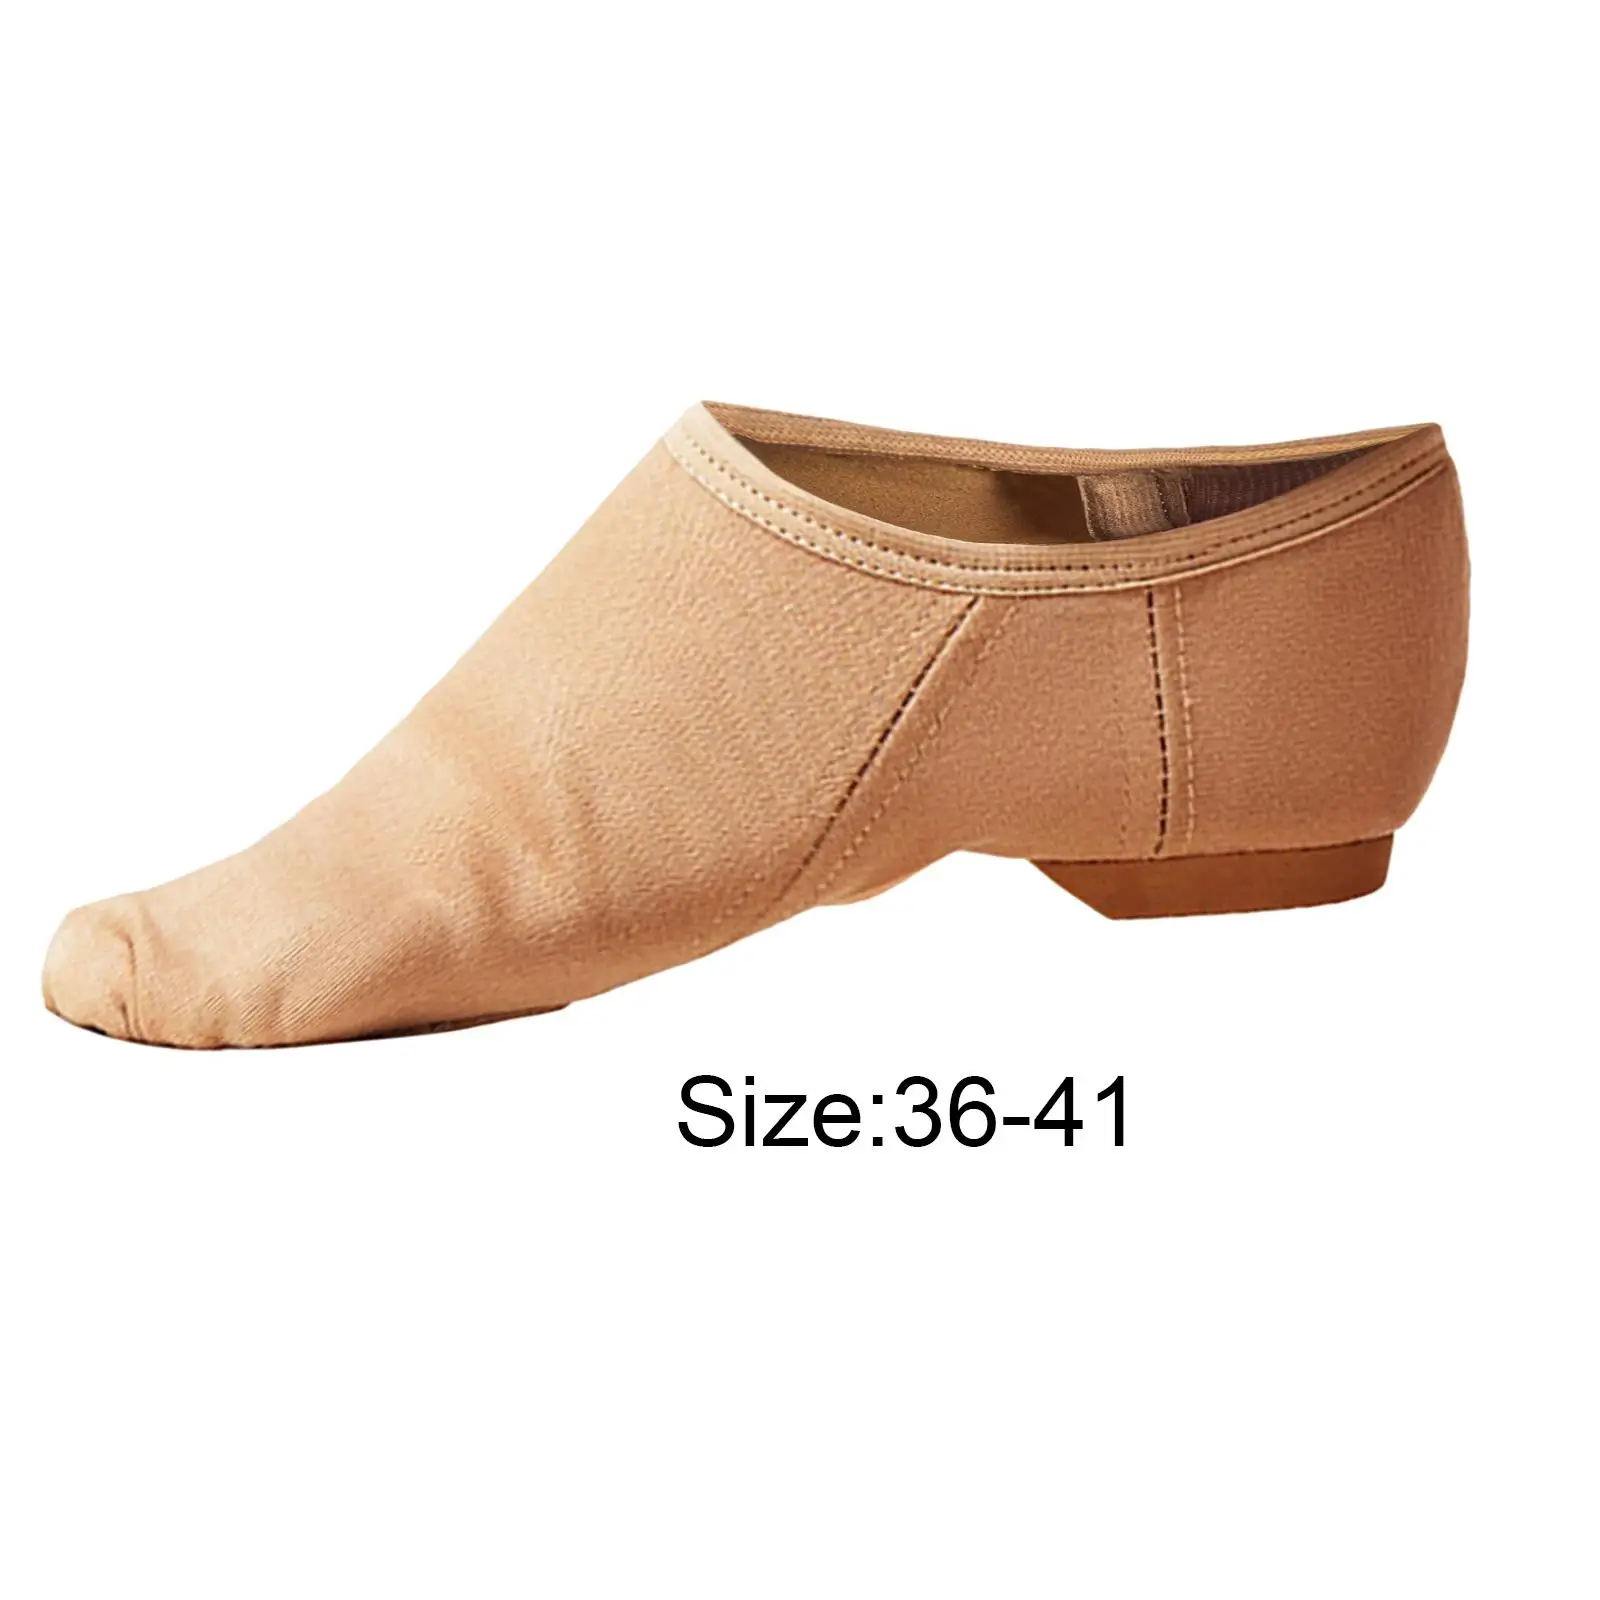 Ballet Shoes Slip on Breathable Comfortable Outfits Split Sole Flats Ballerina Shoes for Women Girls Adults Yoga Exercise